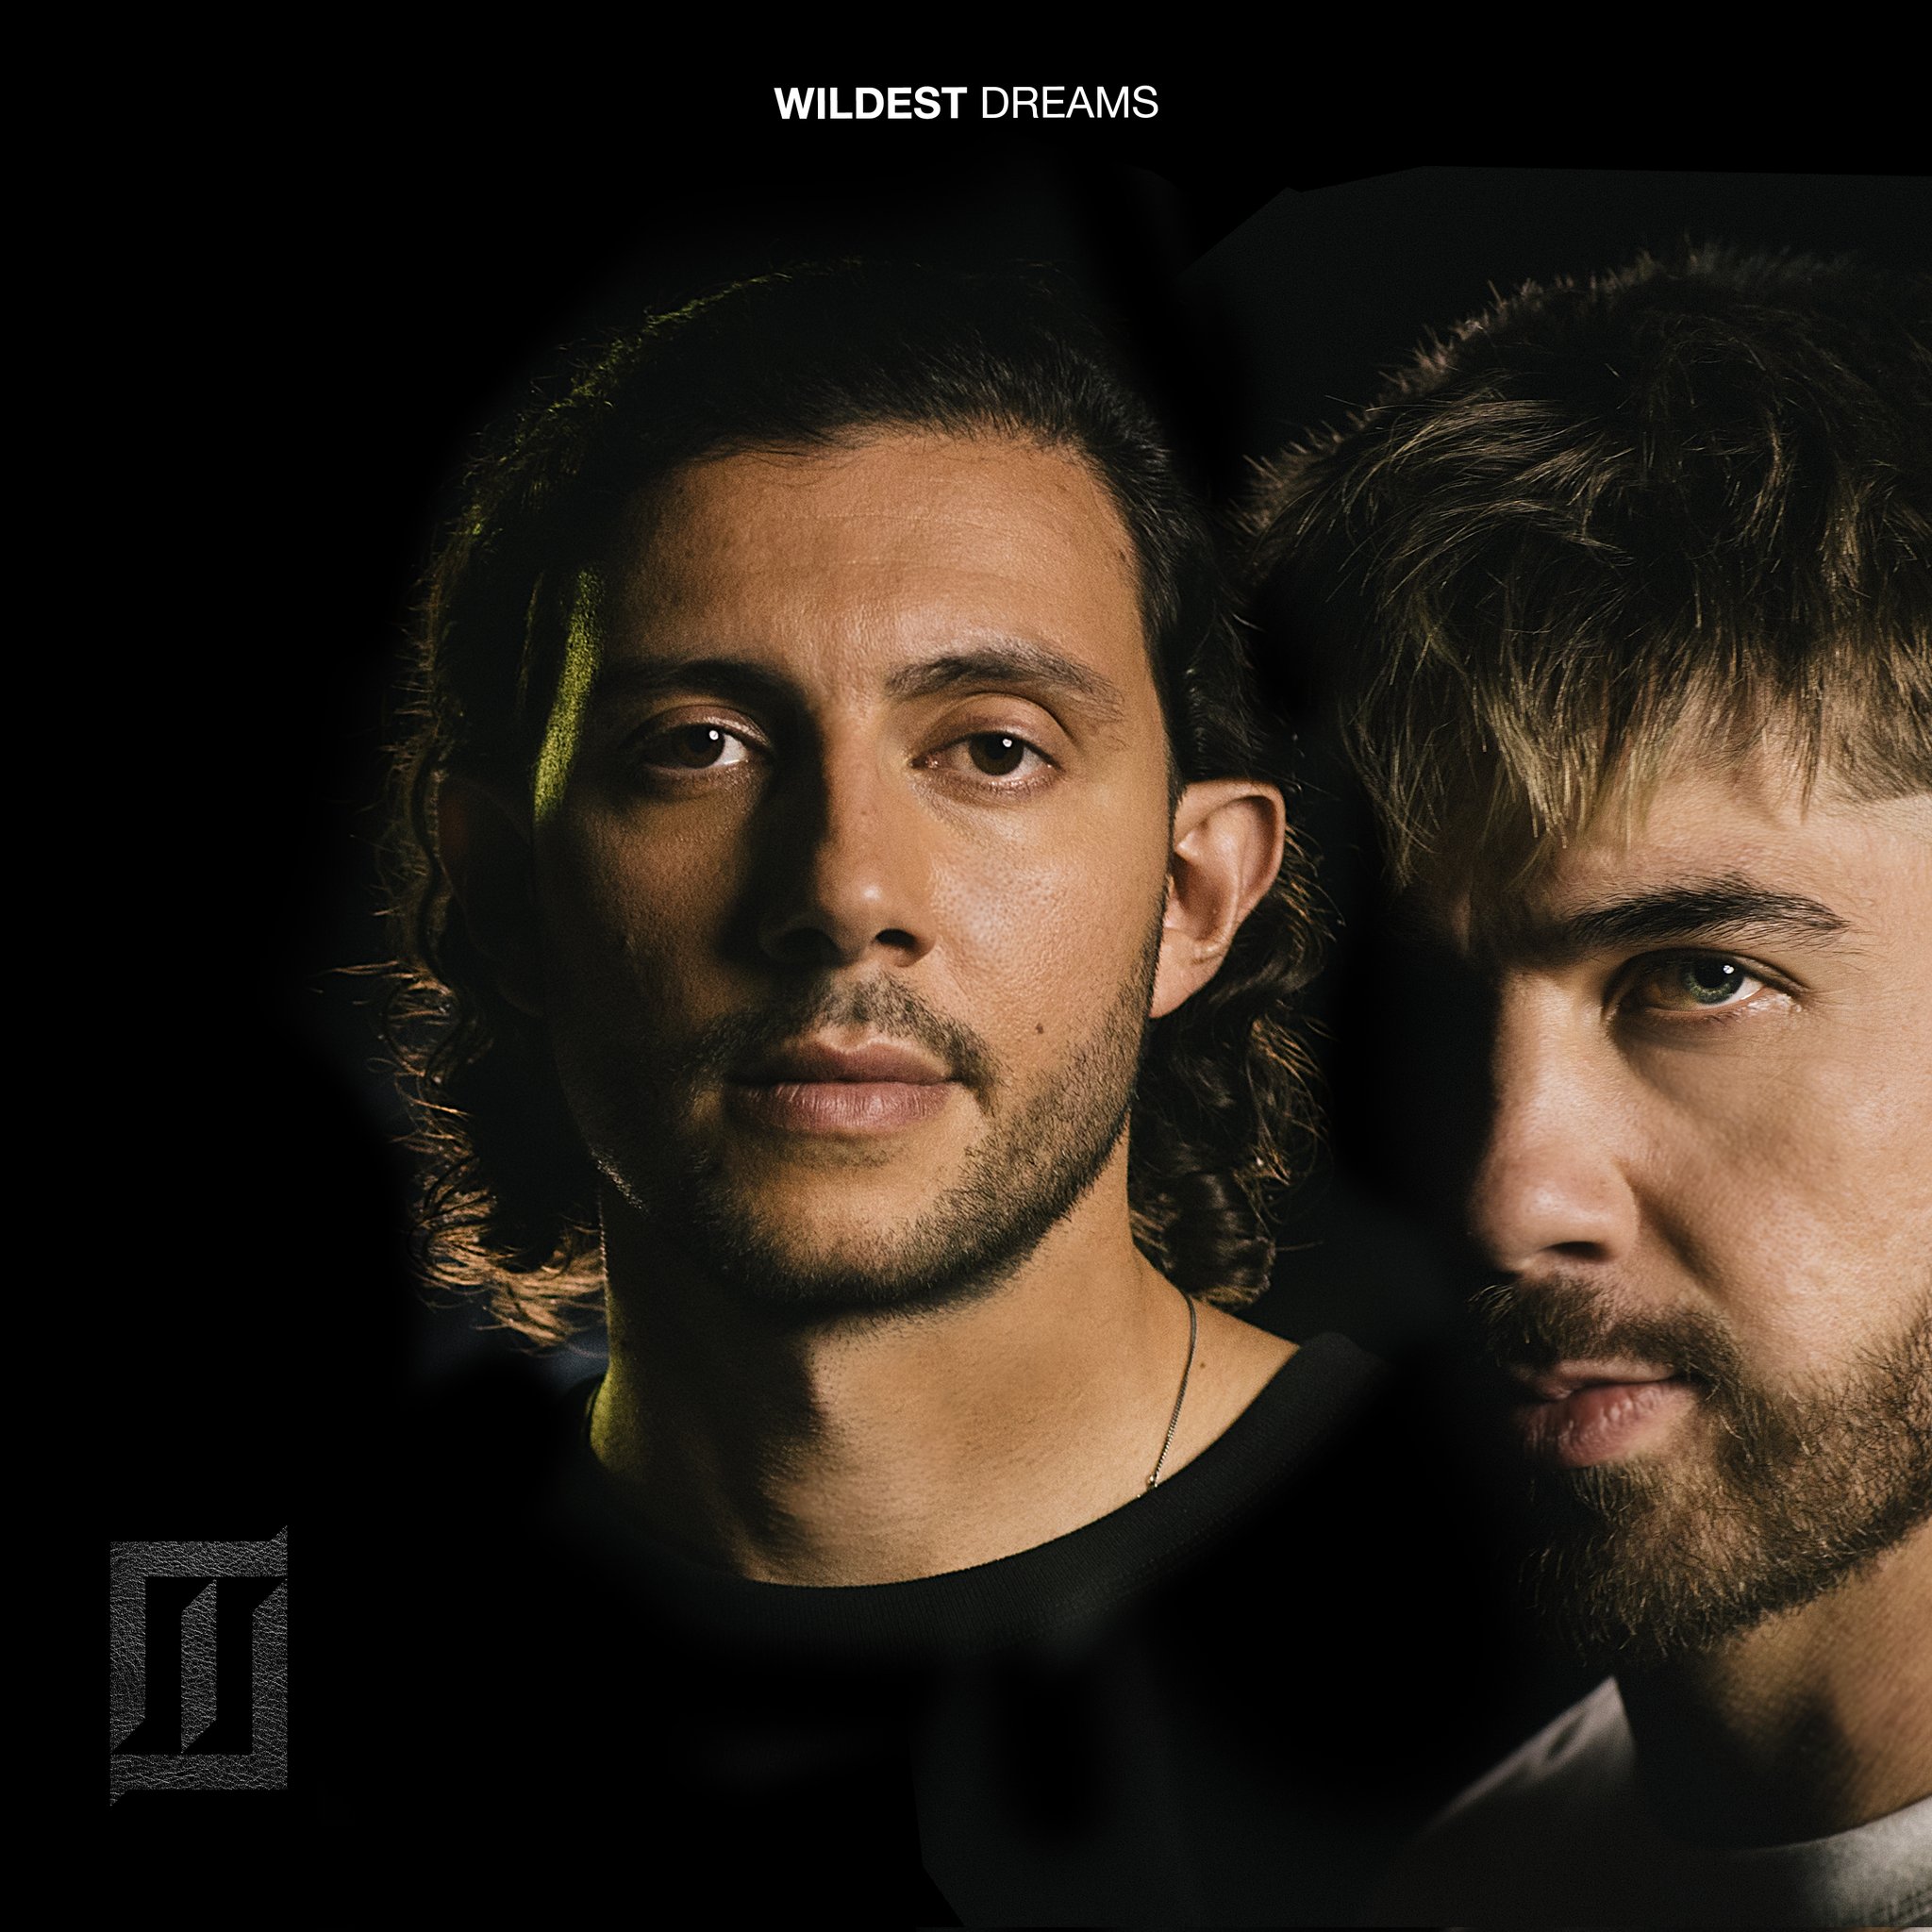 Majid Jordan on Twitter: "“Wildest Dreams” our third album is coming to you all October 22nd https://t.co/MWw71IHhY9" / Twitter